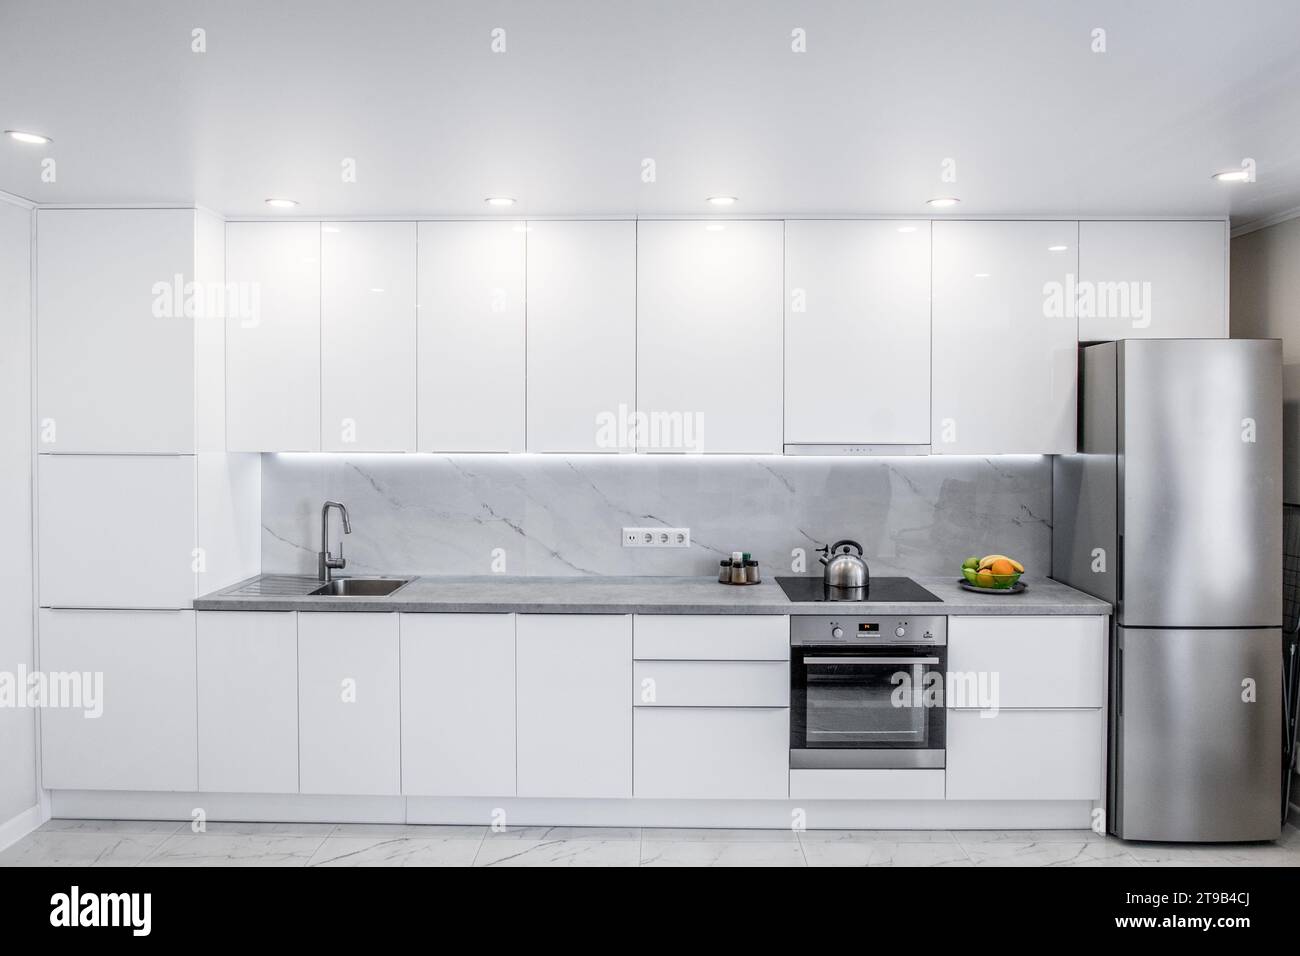 Front view of a modern white kitchen with many cabinets and all the necessary built-in appliances Stock Photo